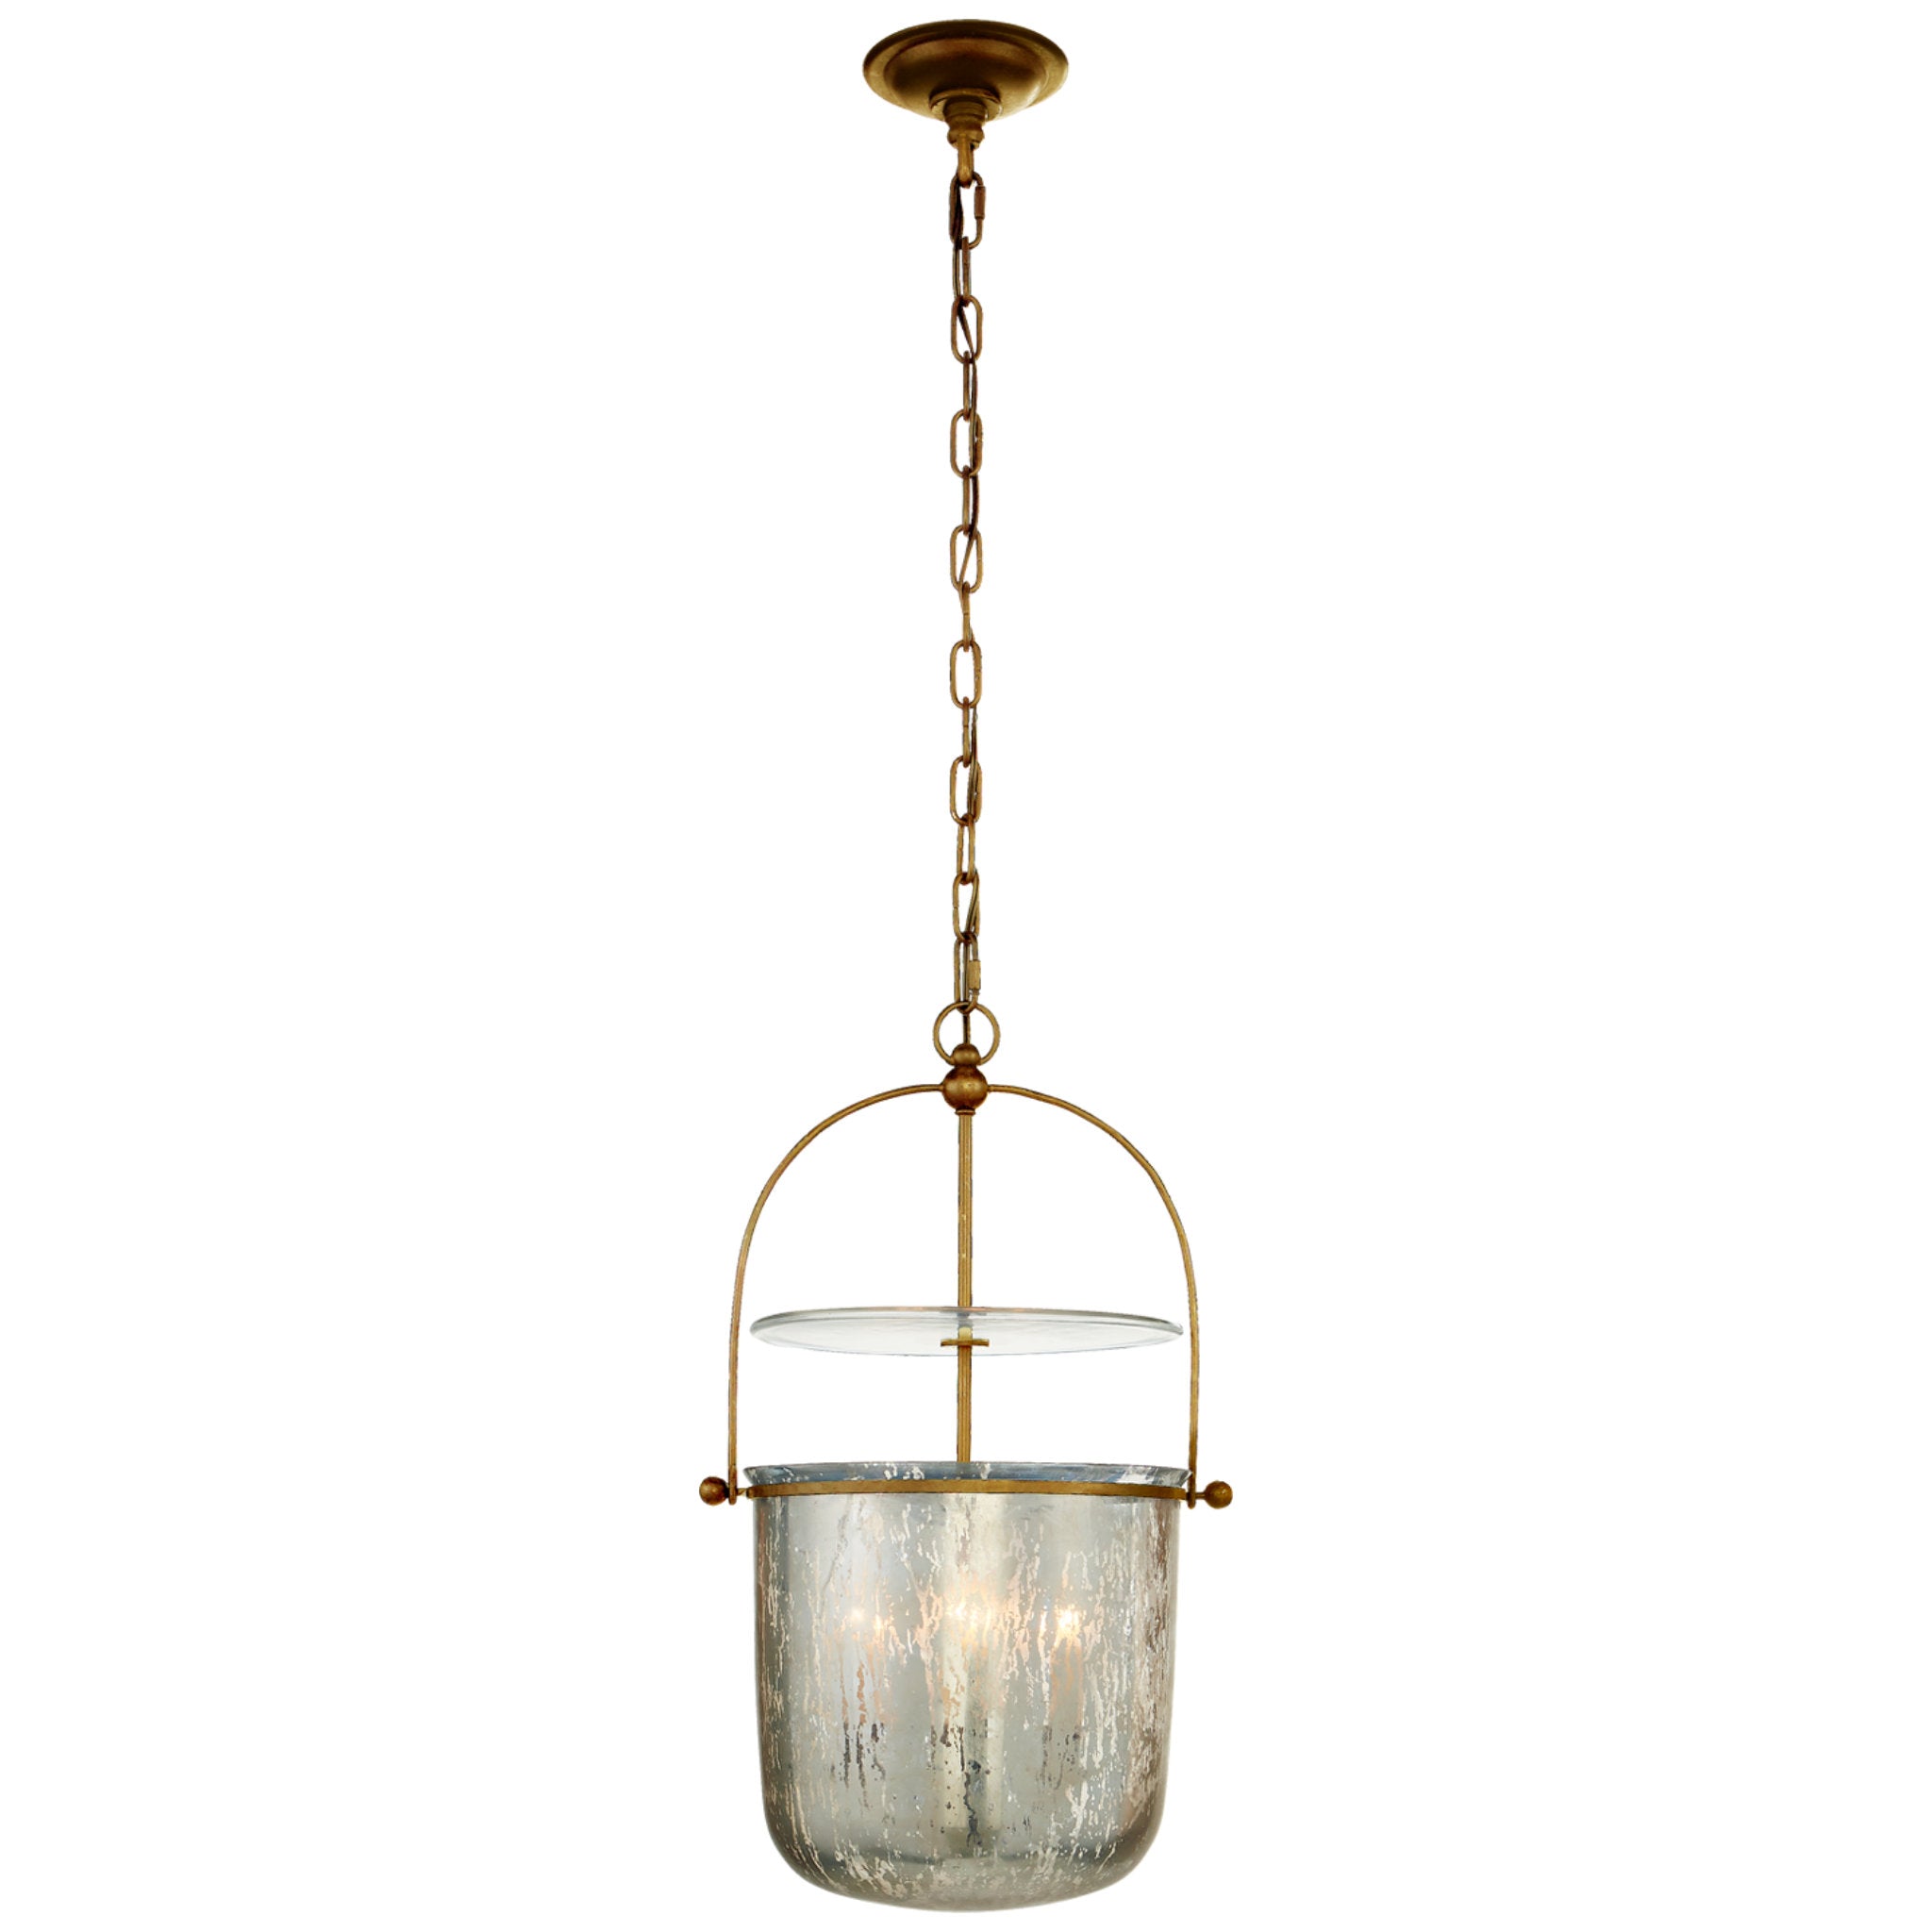 Chapman & Myers Lorford Small Smoke Bell Lantern in Gilded Iron with Antiqued Mercury Glass